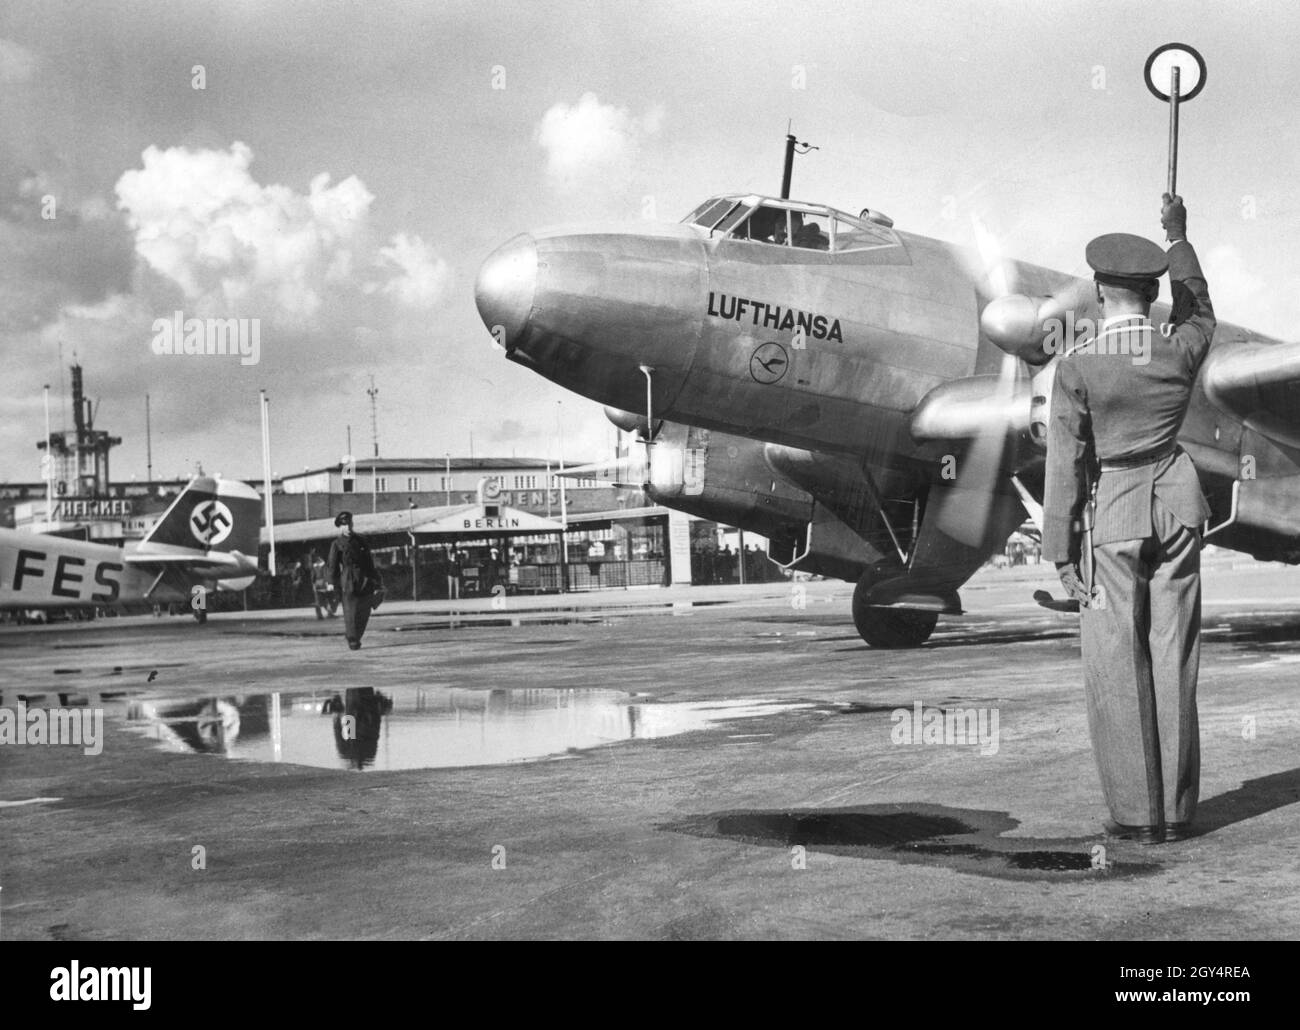 A ground controller gives a signal to the pilot of a Lufthansa Junkers Ju 86. The photograph was taken in 1937 at Berlin-Tempelhof Airport. [automated translation] Stock Photo